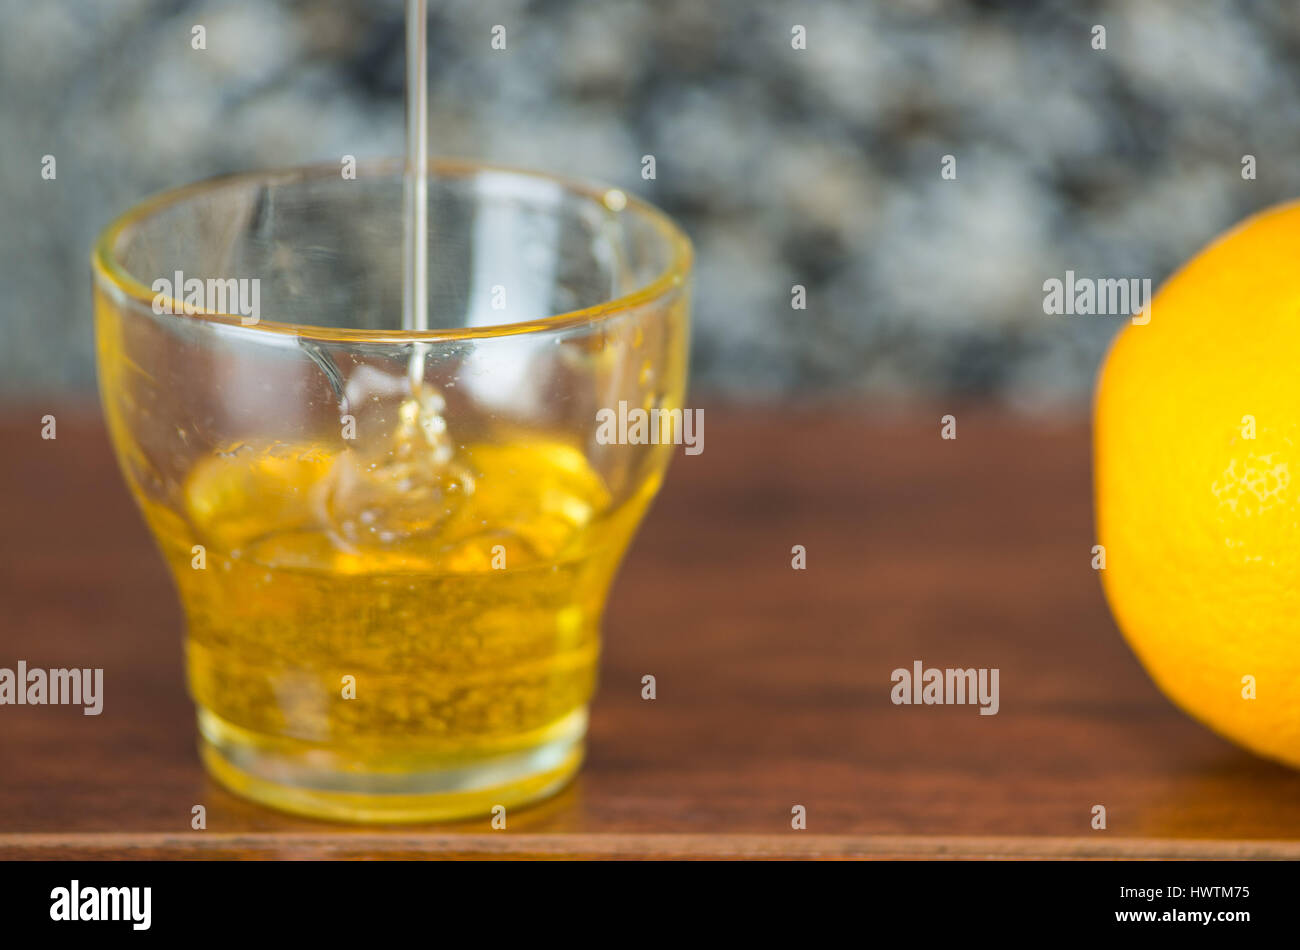 Close up small glass sitting on wooden desk with honey falling into it from above, lemon on the side Stock Photo